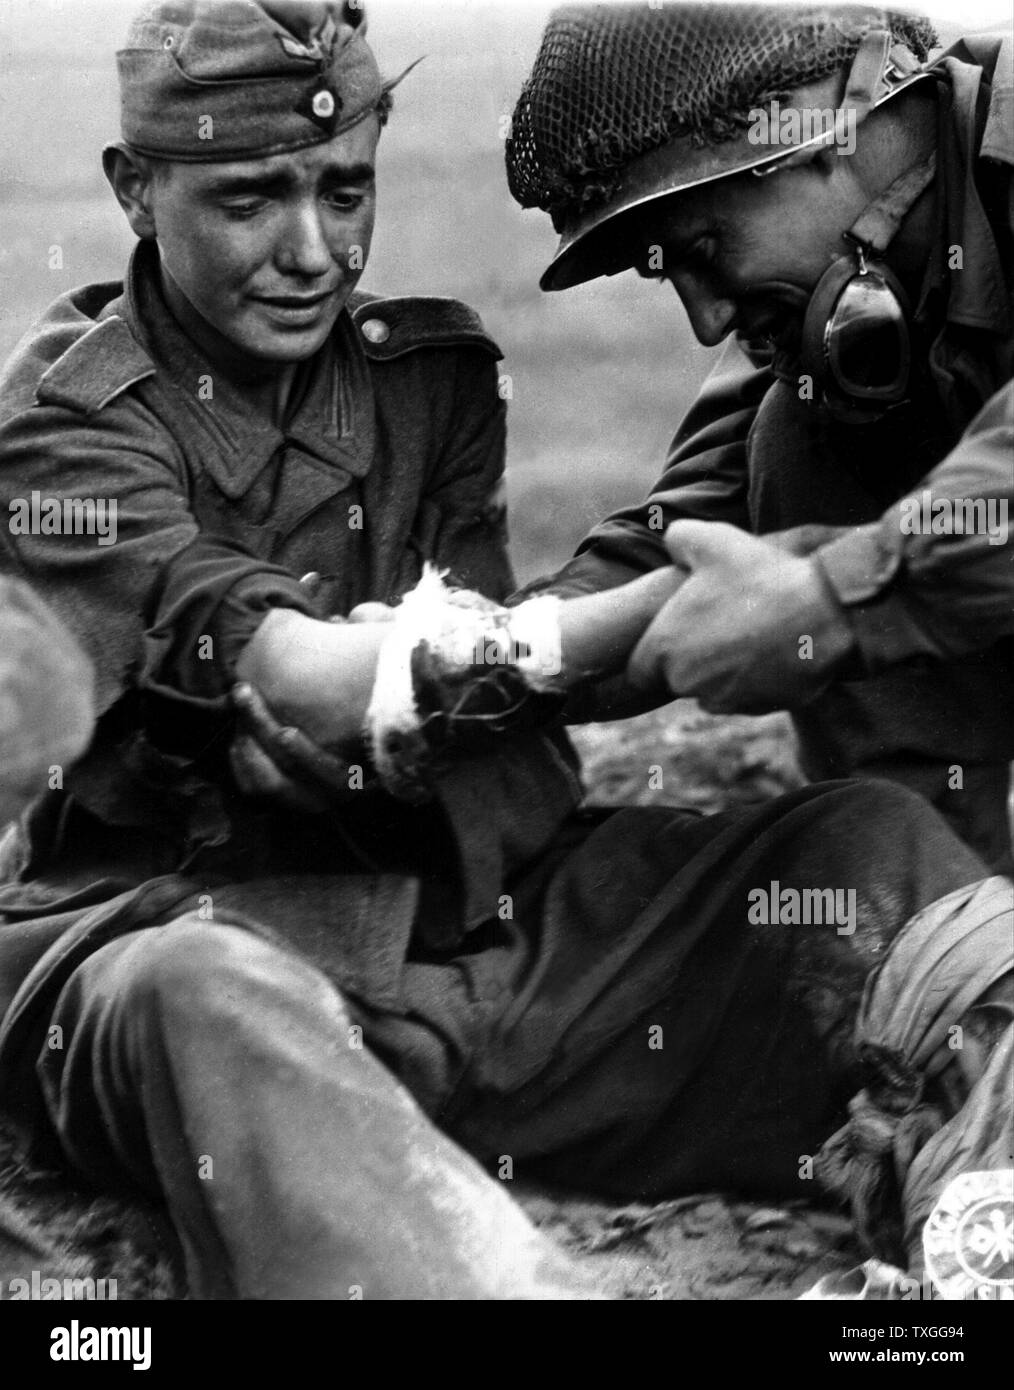 A captured, teenage, German soldier cries as he is treated for his wounds by an American soldier as they wait for a medic to arrive. From Cherbourg, France. Stock Photo